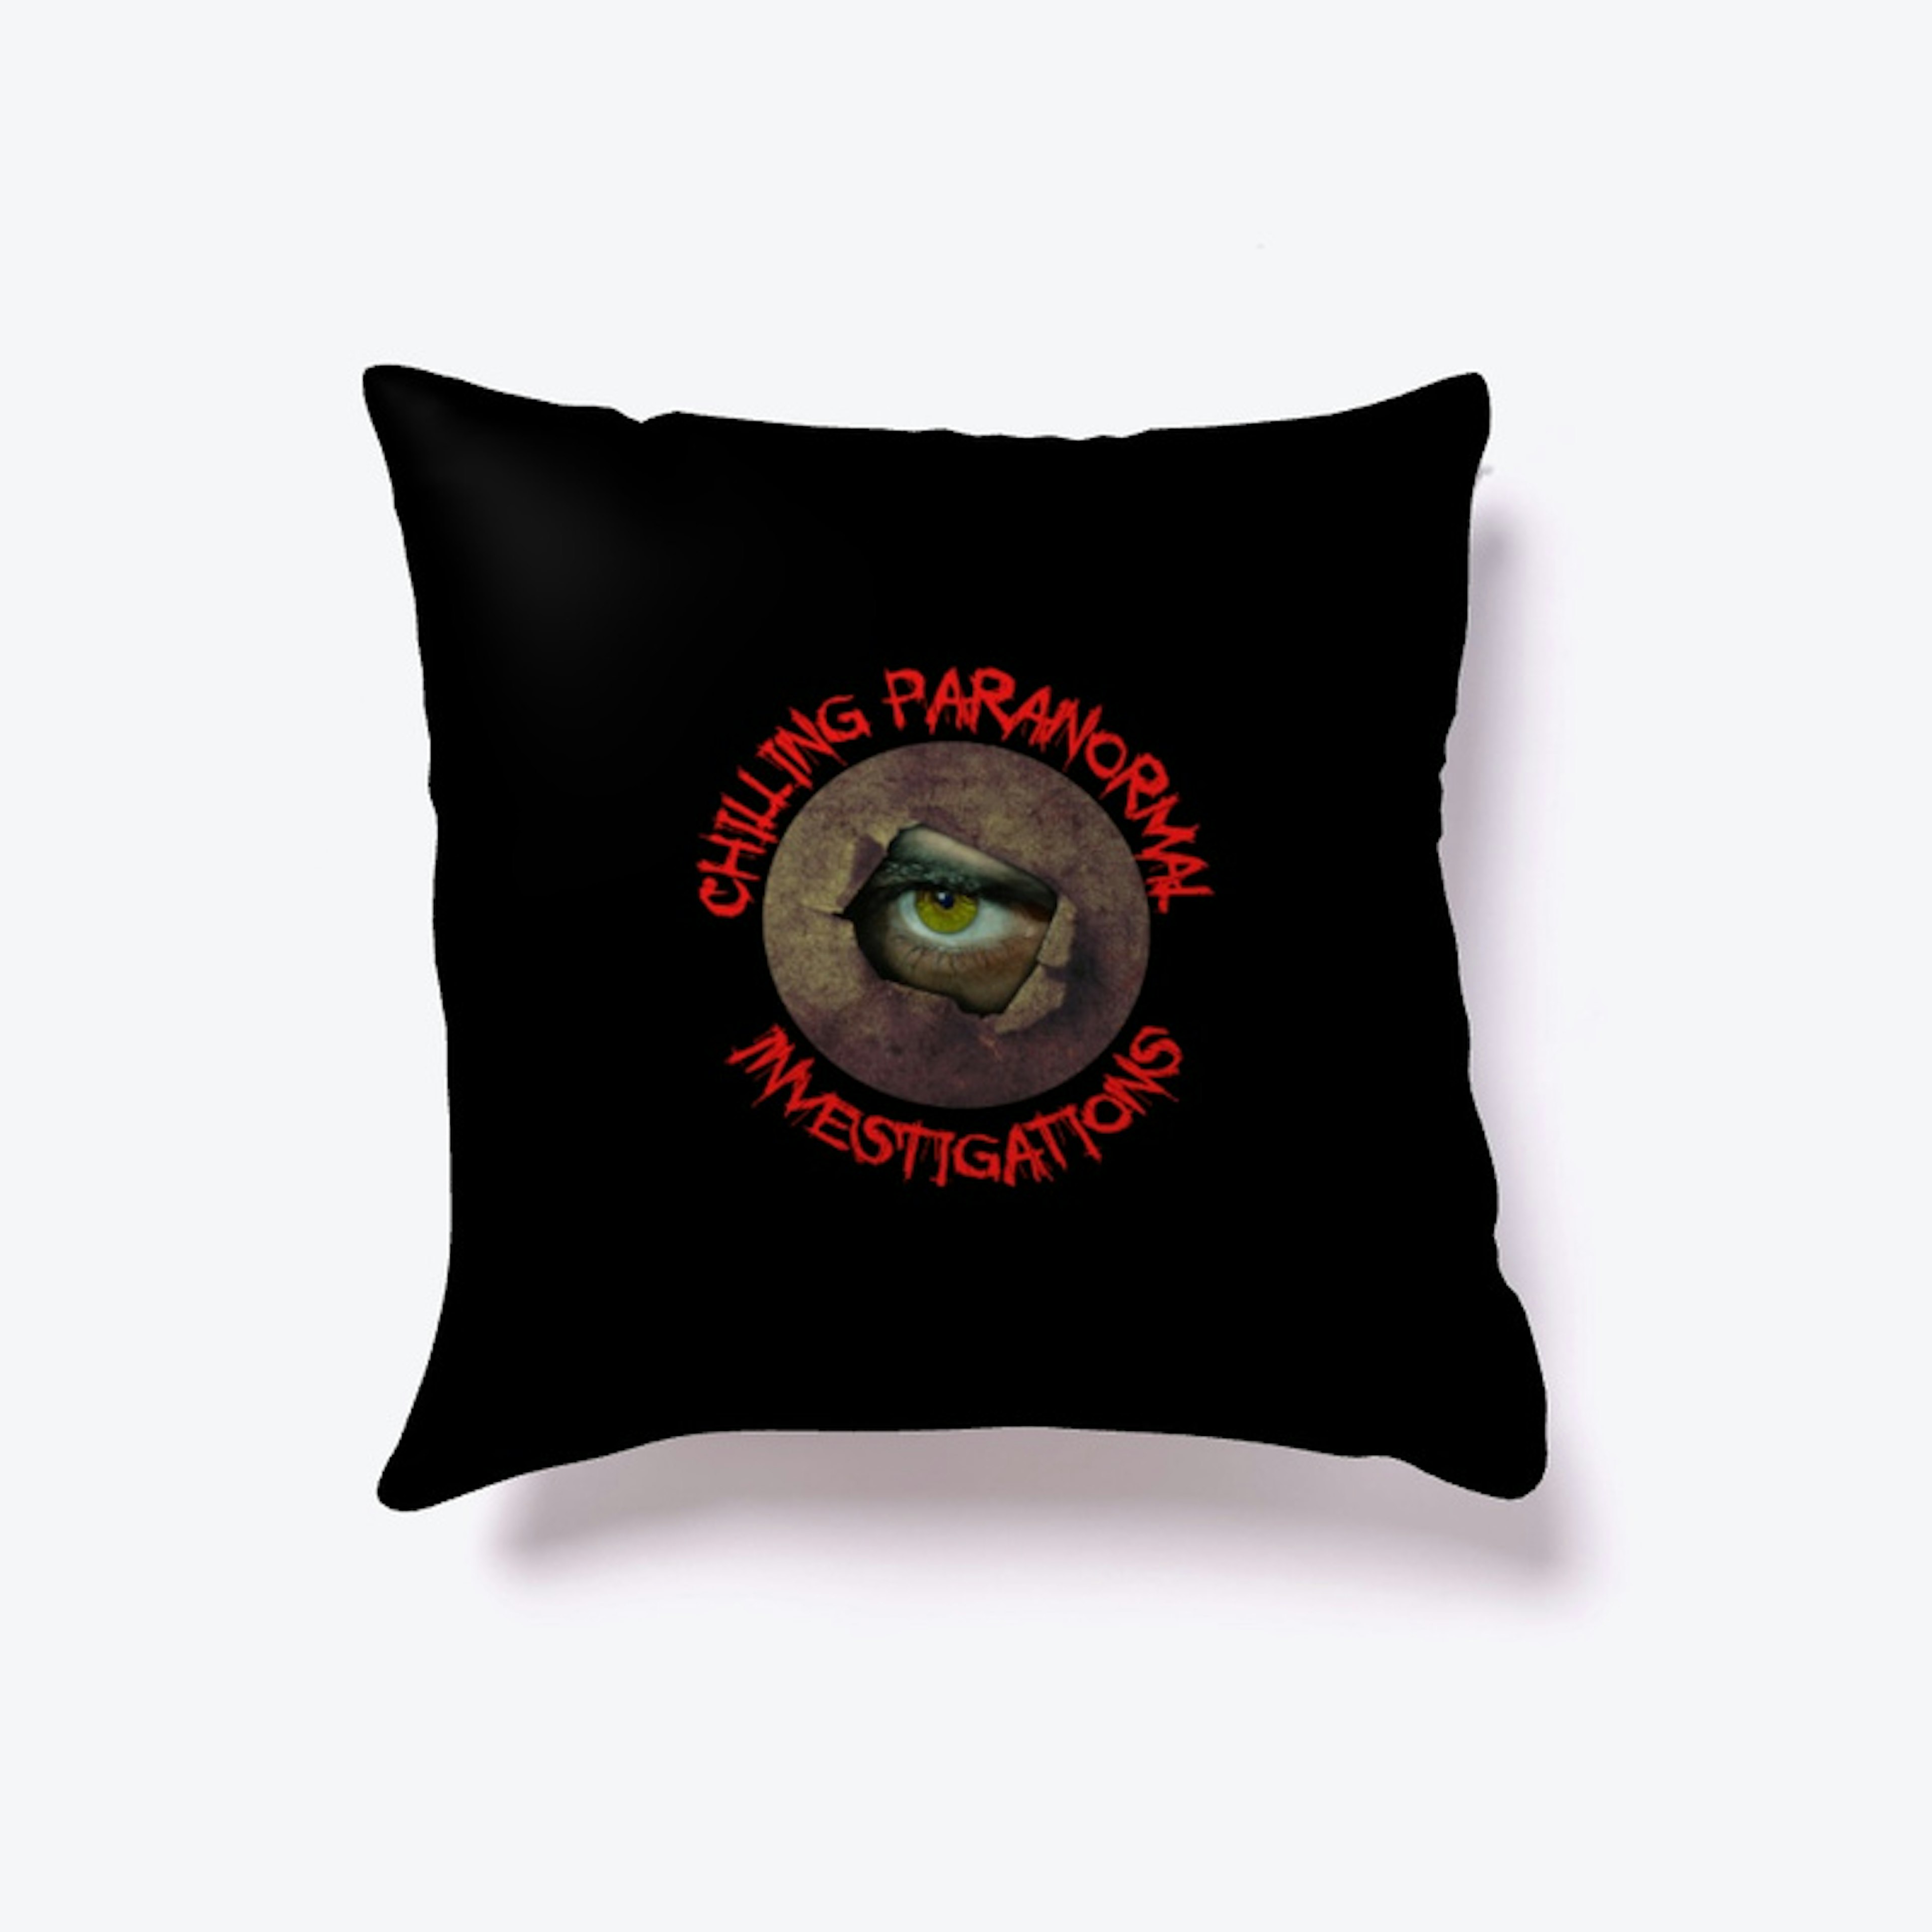 Chilling Paranormal Decorative Pillow